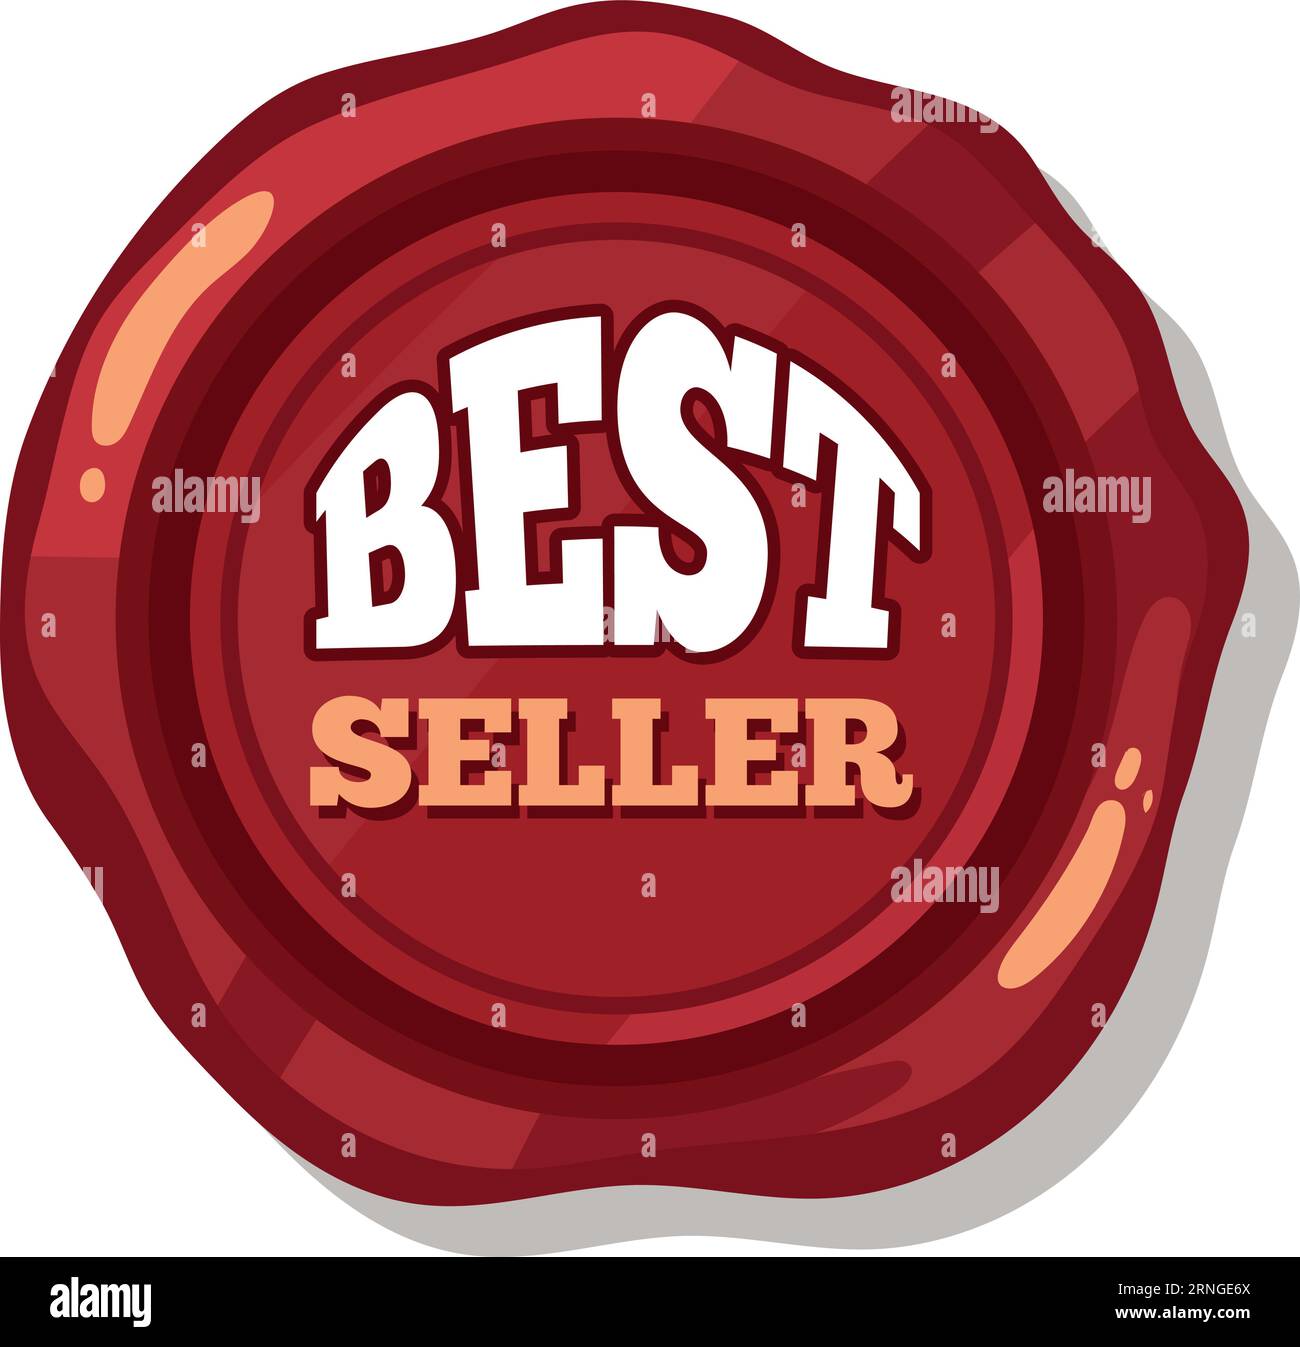 Best seller round label. Red wax stamp Stock Vector